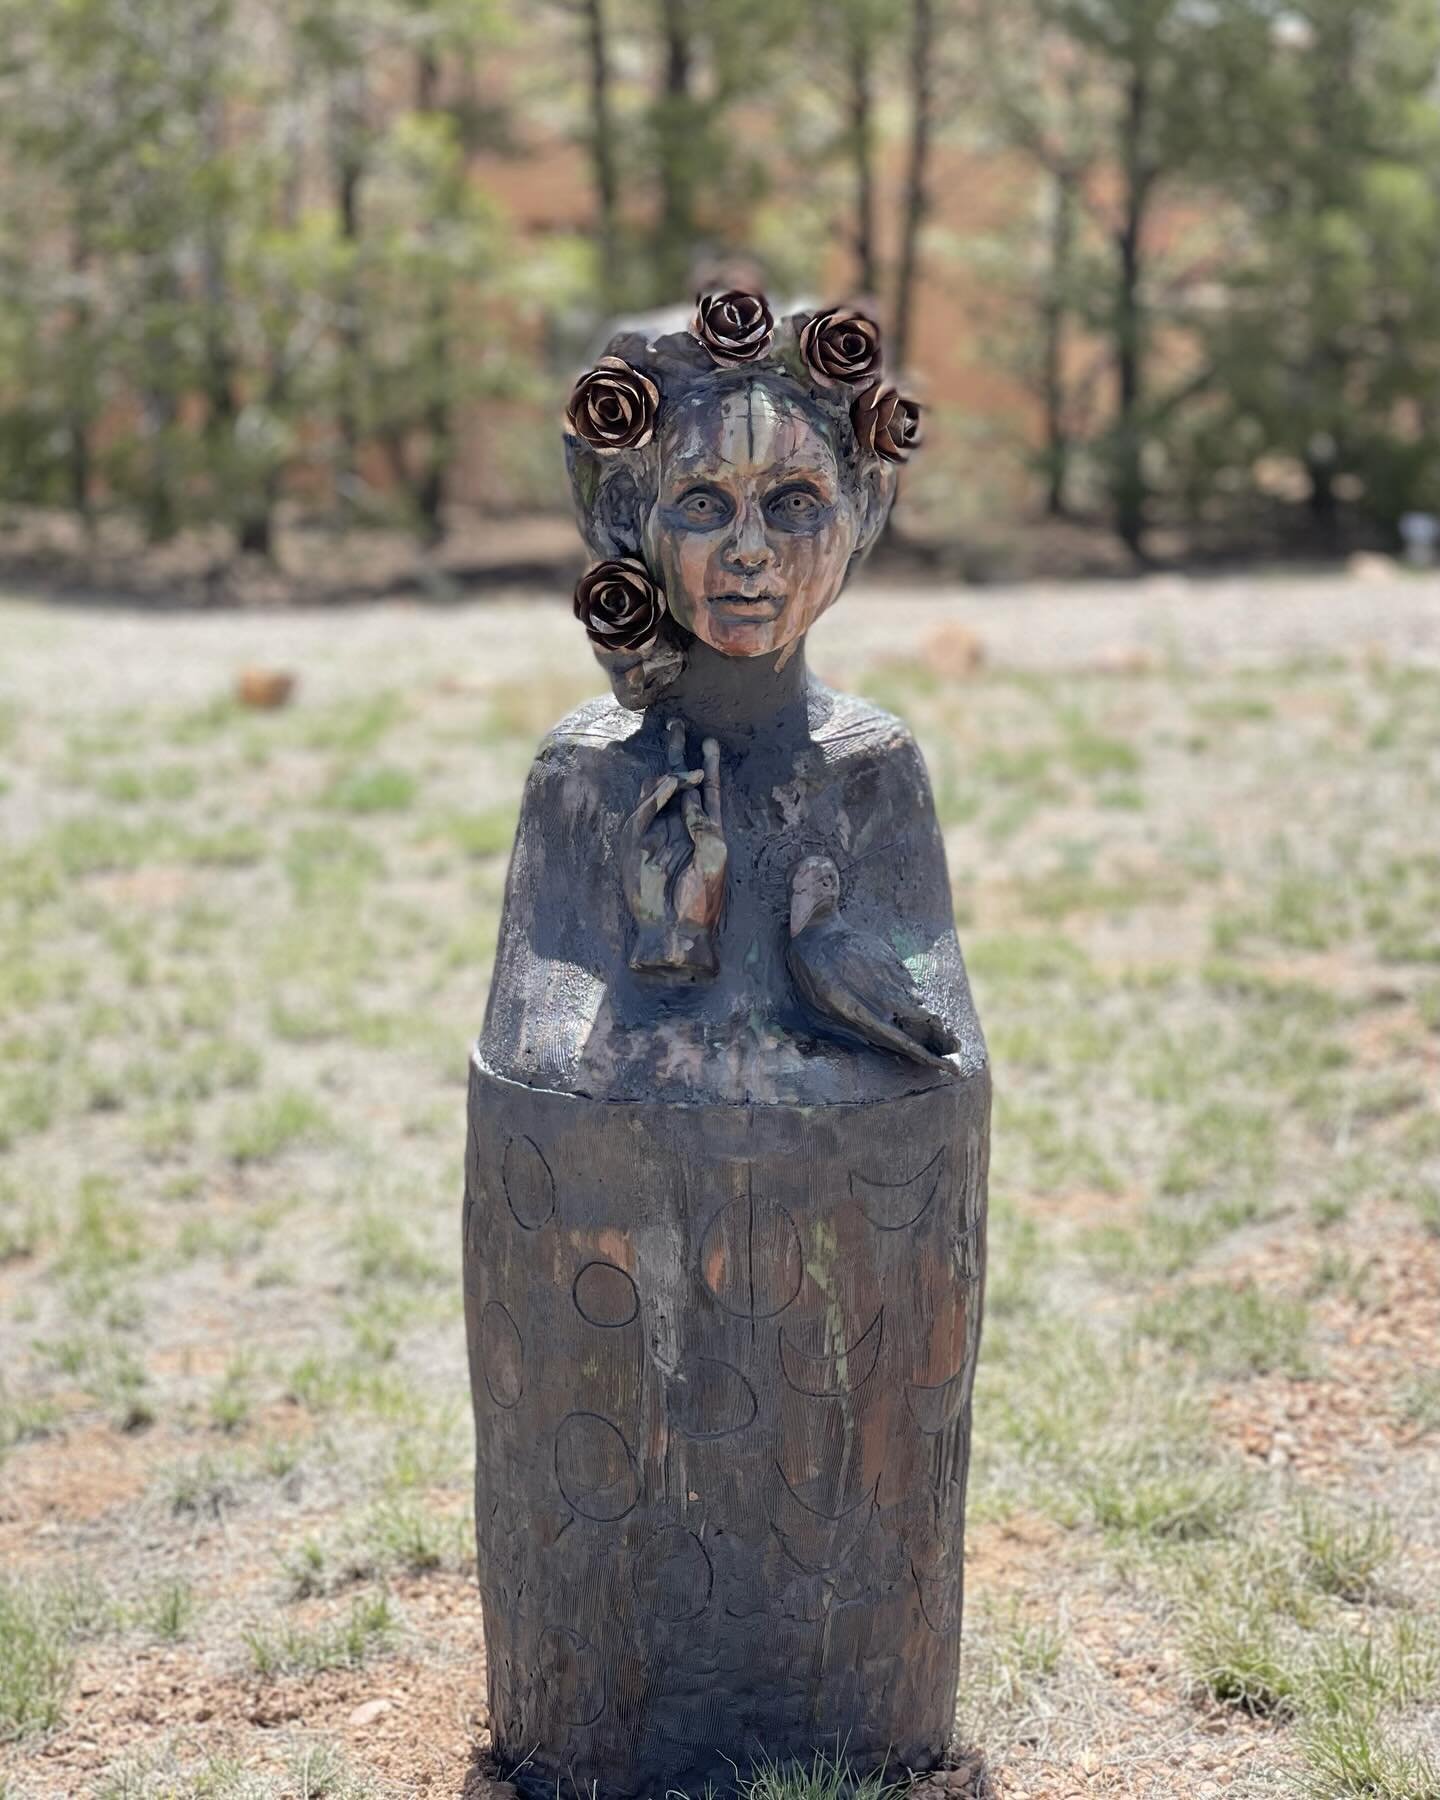 Well my guardian for my driveway is finally finished. A ghost in my house decapitated her after I had built her and left a fingerprint in her cheek ( swipe to see photos) to let me know of its presence. I heard New Mexico puts you thru its paces befo